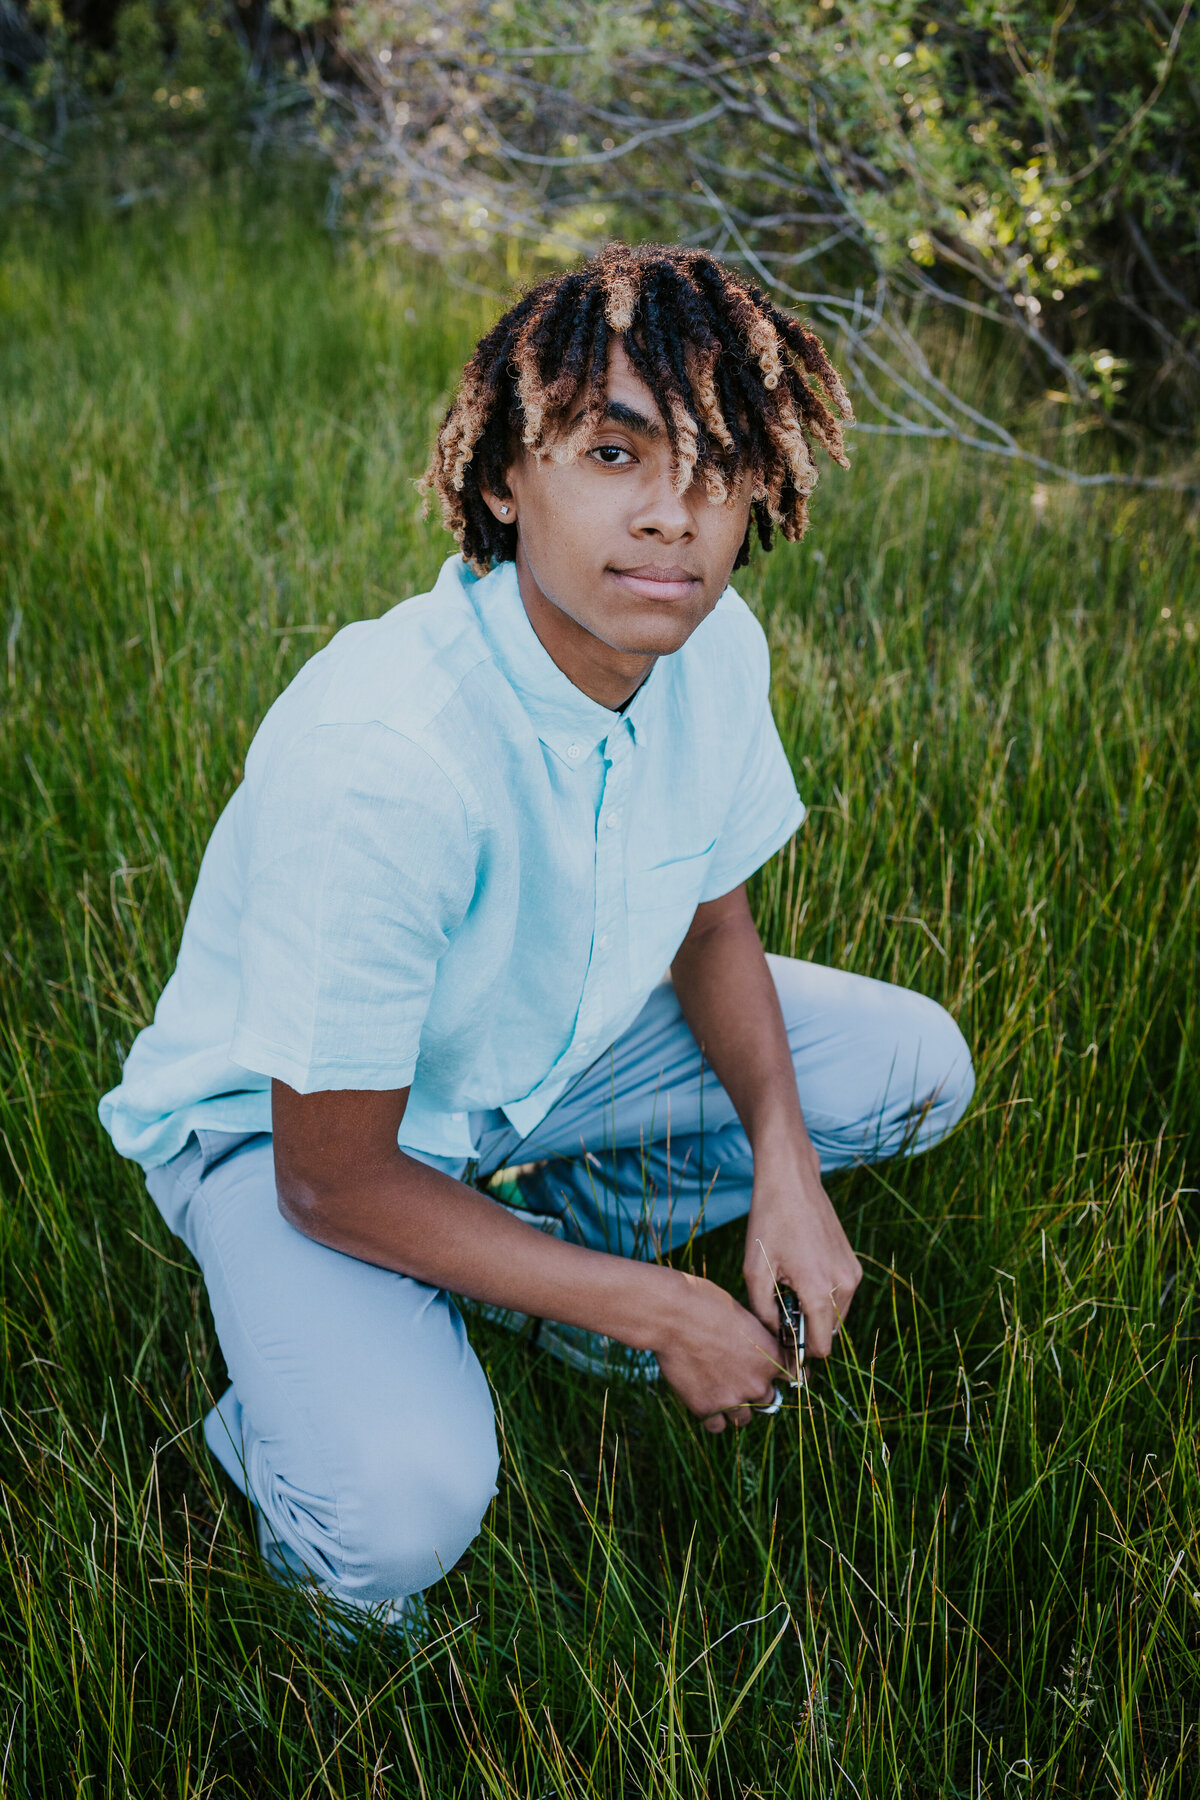 Young man squats down in grassy meadow while looking up at camera.